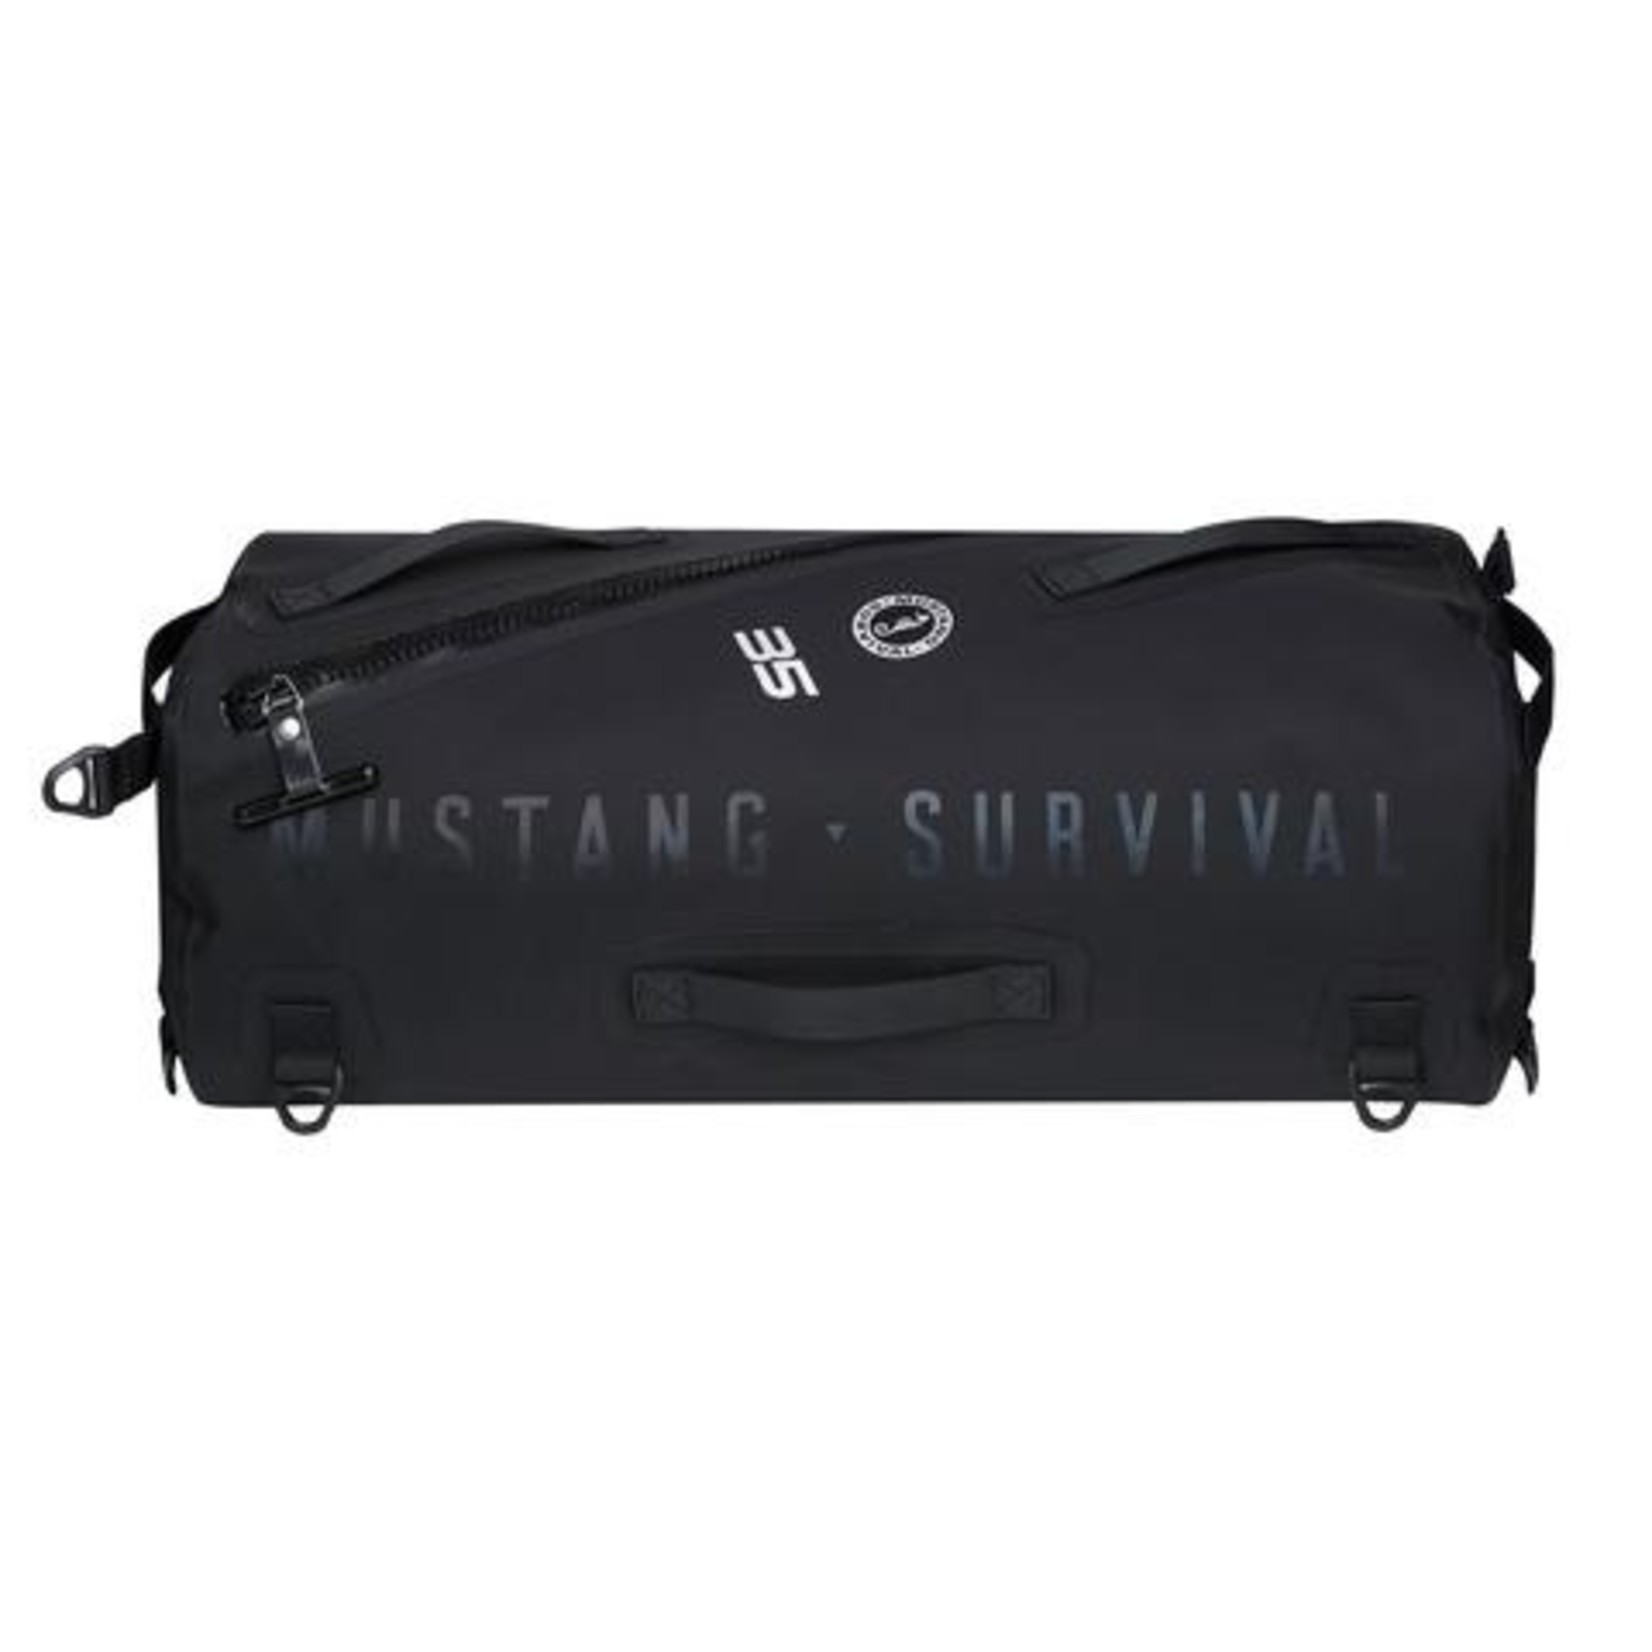 Mustang Survival Mustang Survival Greenwater Submersible Deck Dry Bag